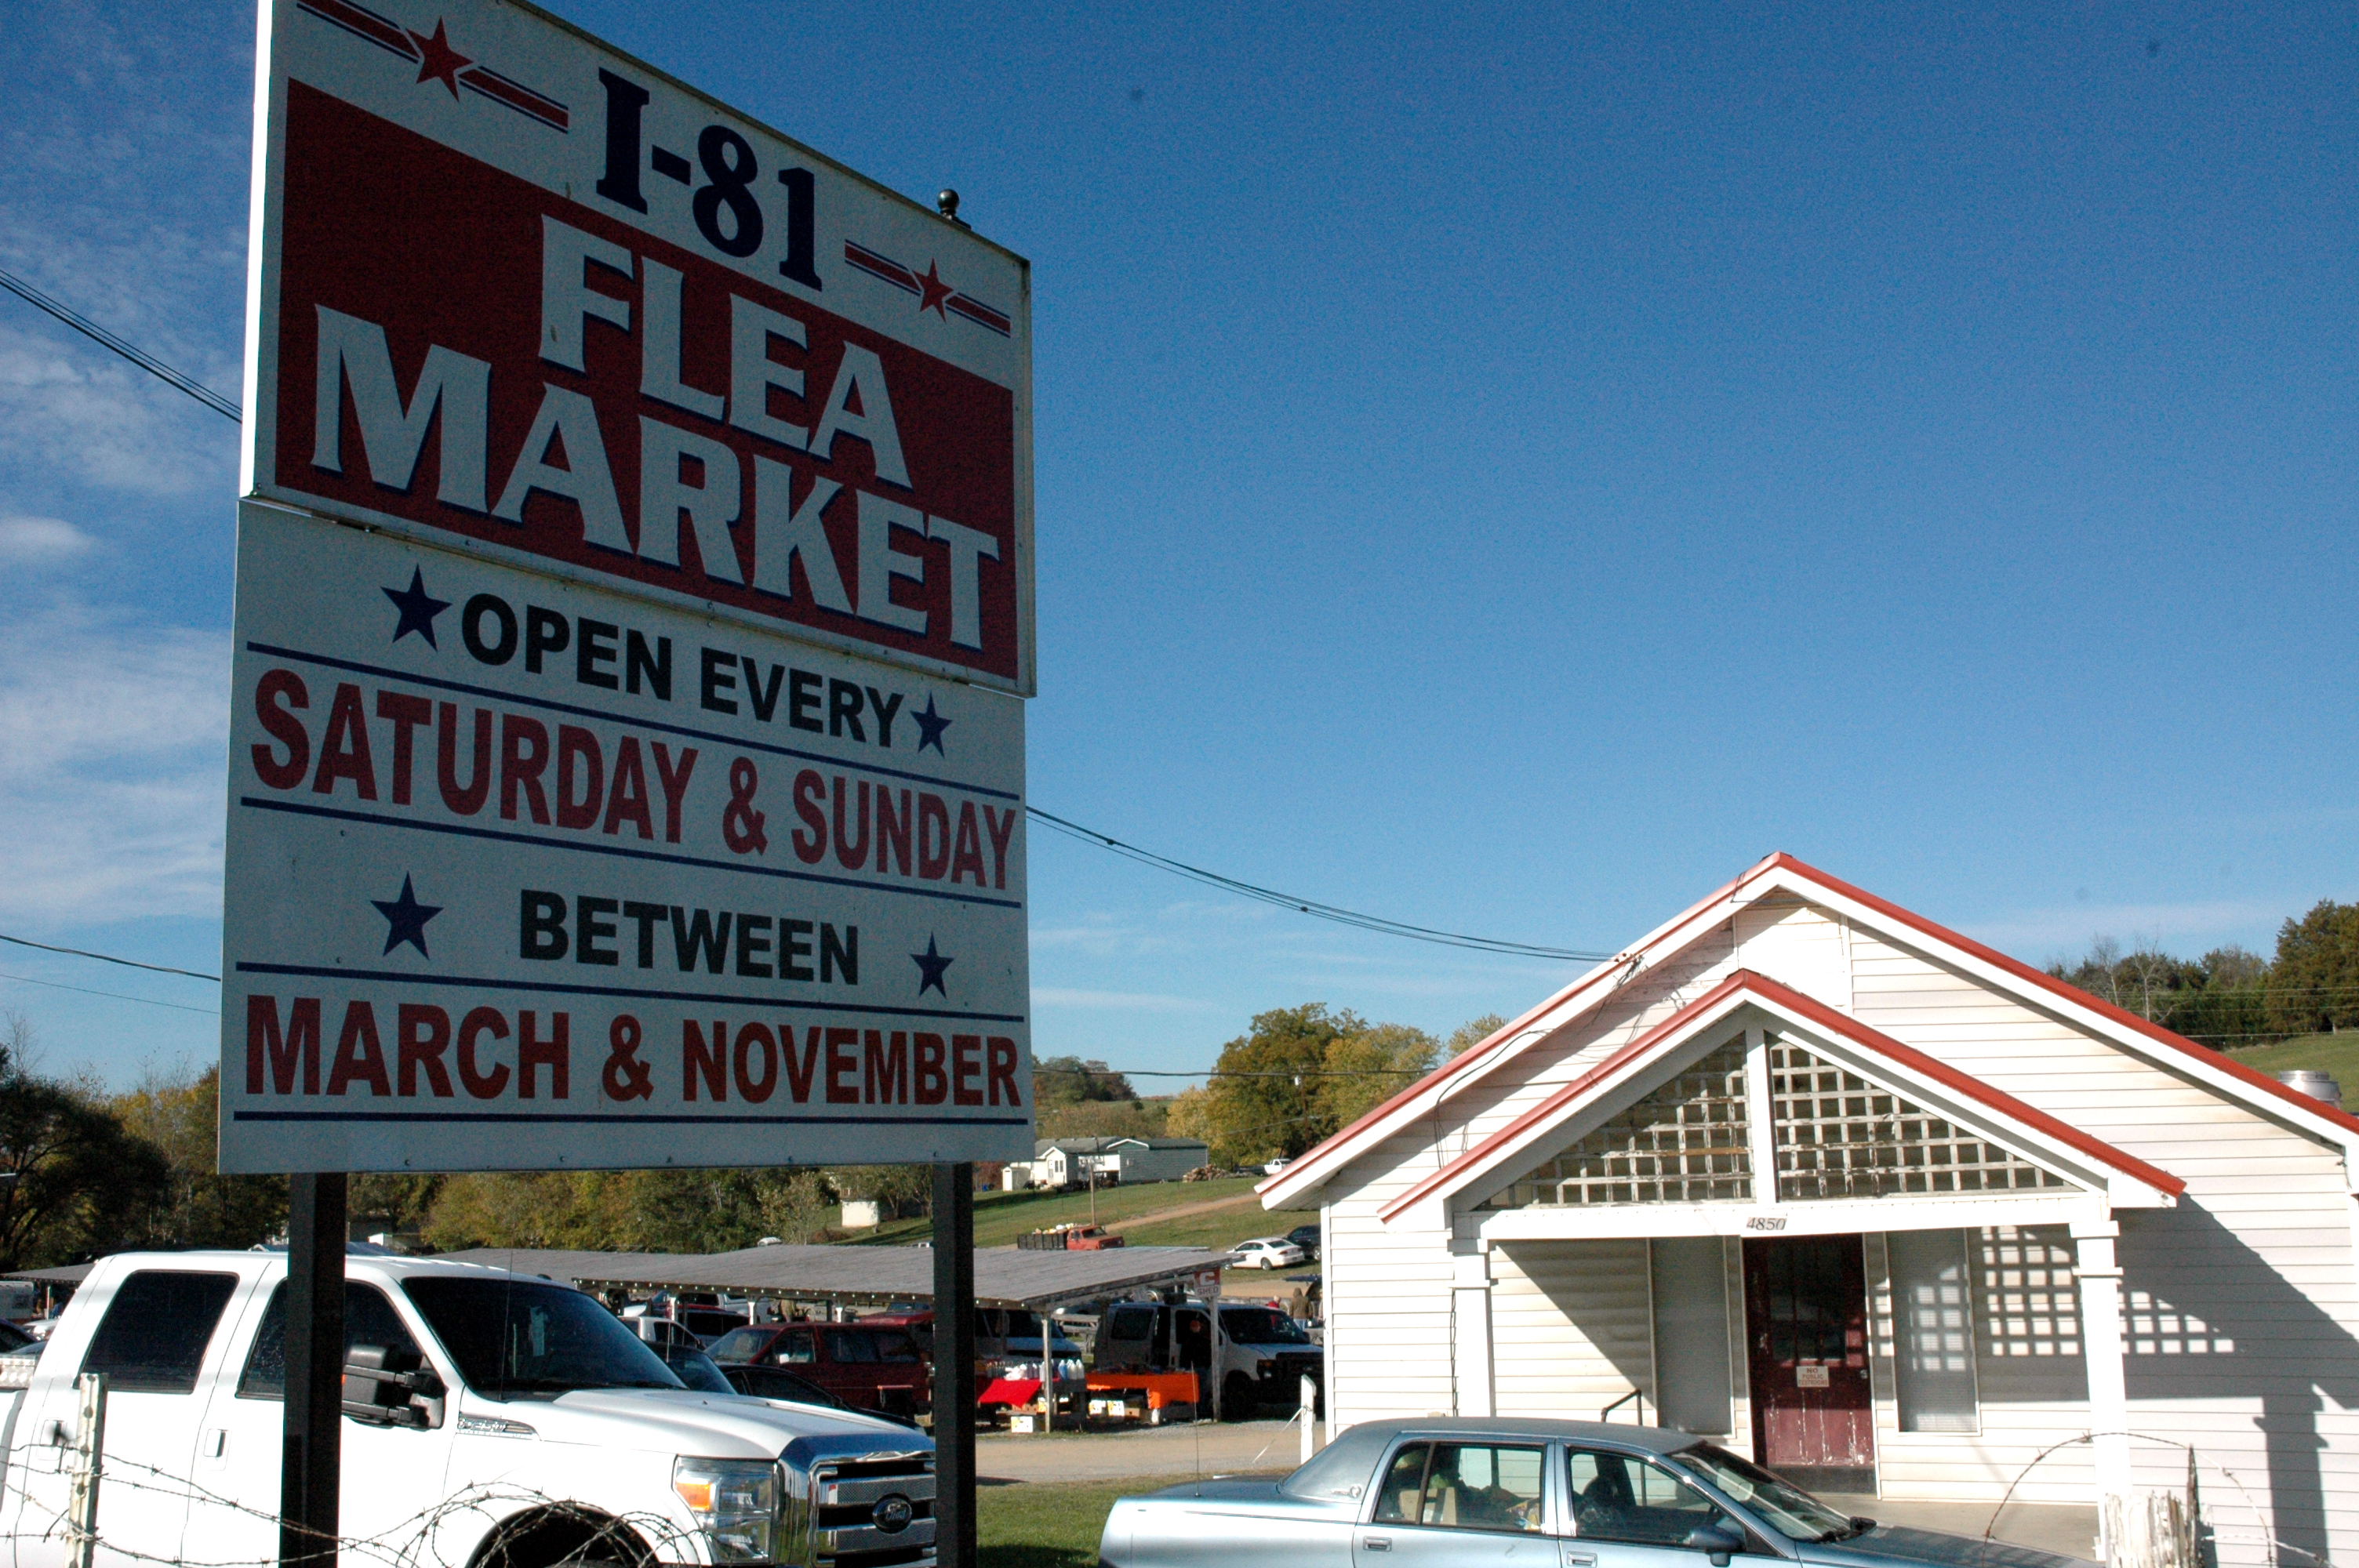 Quality goods, laughs and more at I-81 Flea Market